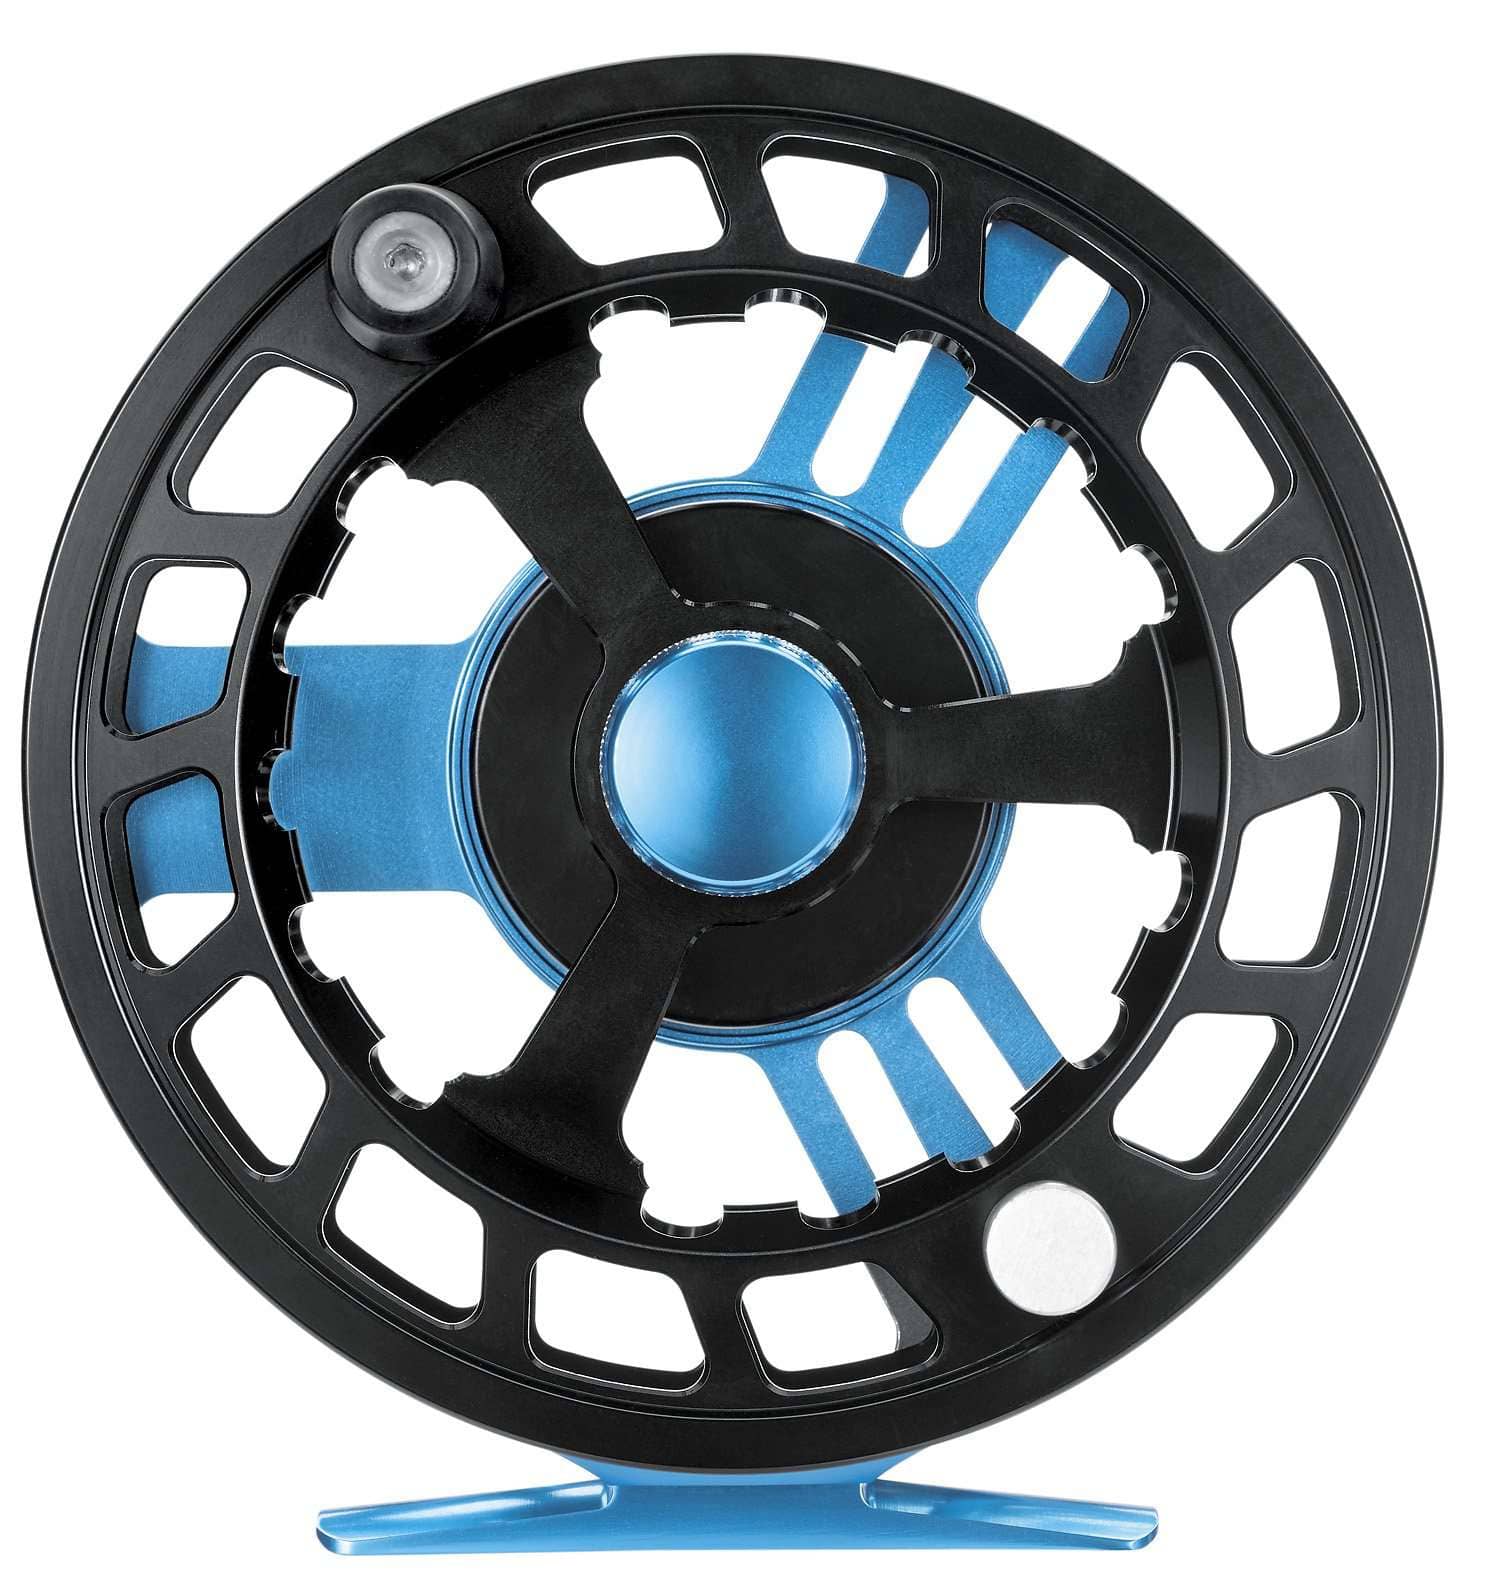 Buy Launch 400 Fly Fishing Reel online from Cheeky Fishing - Cheeky Fishing